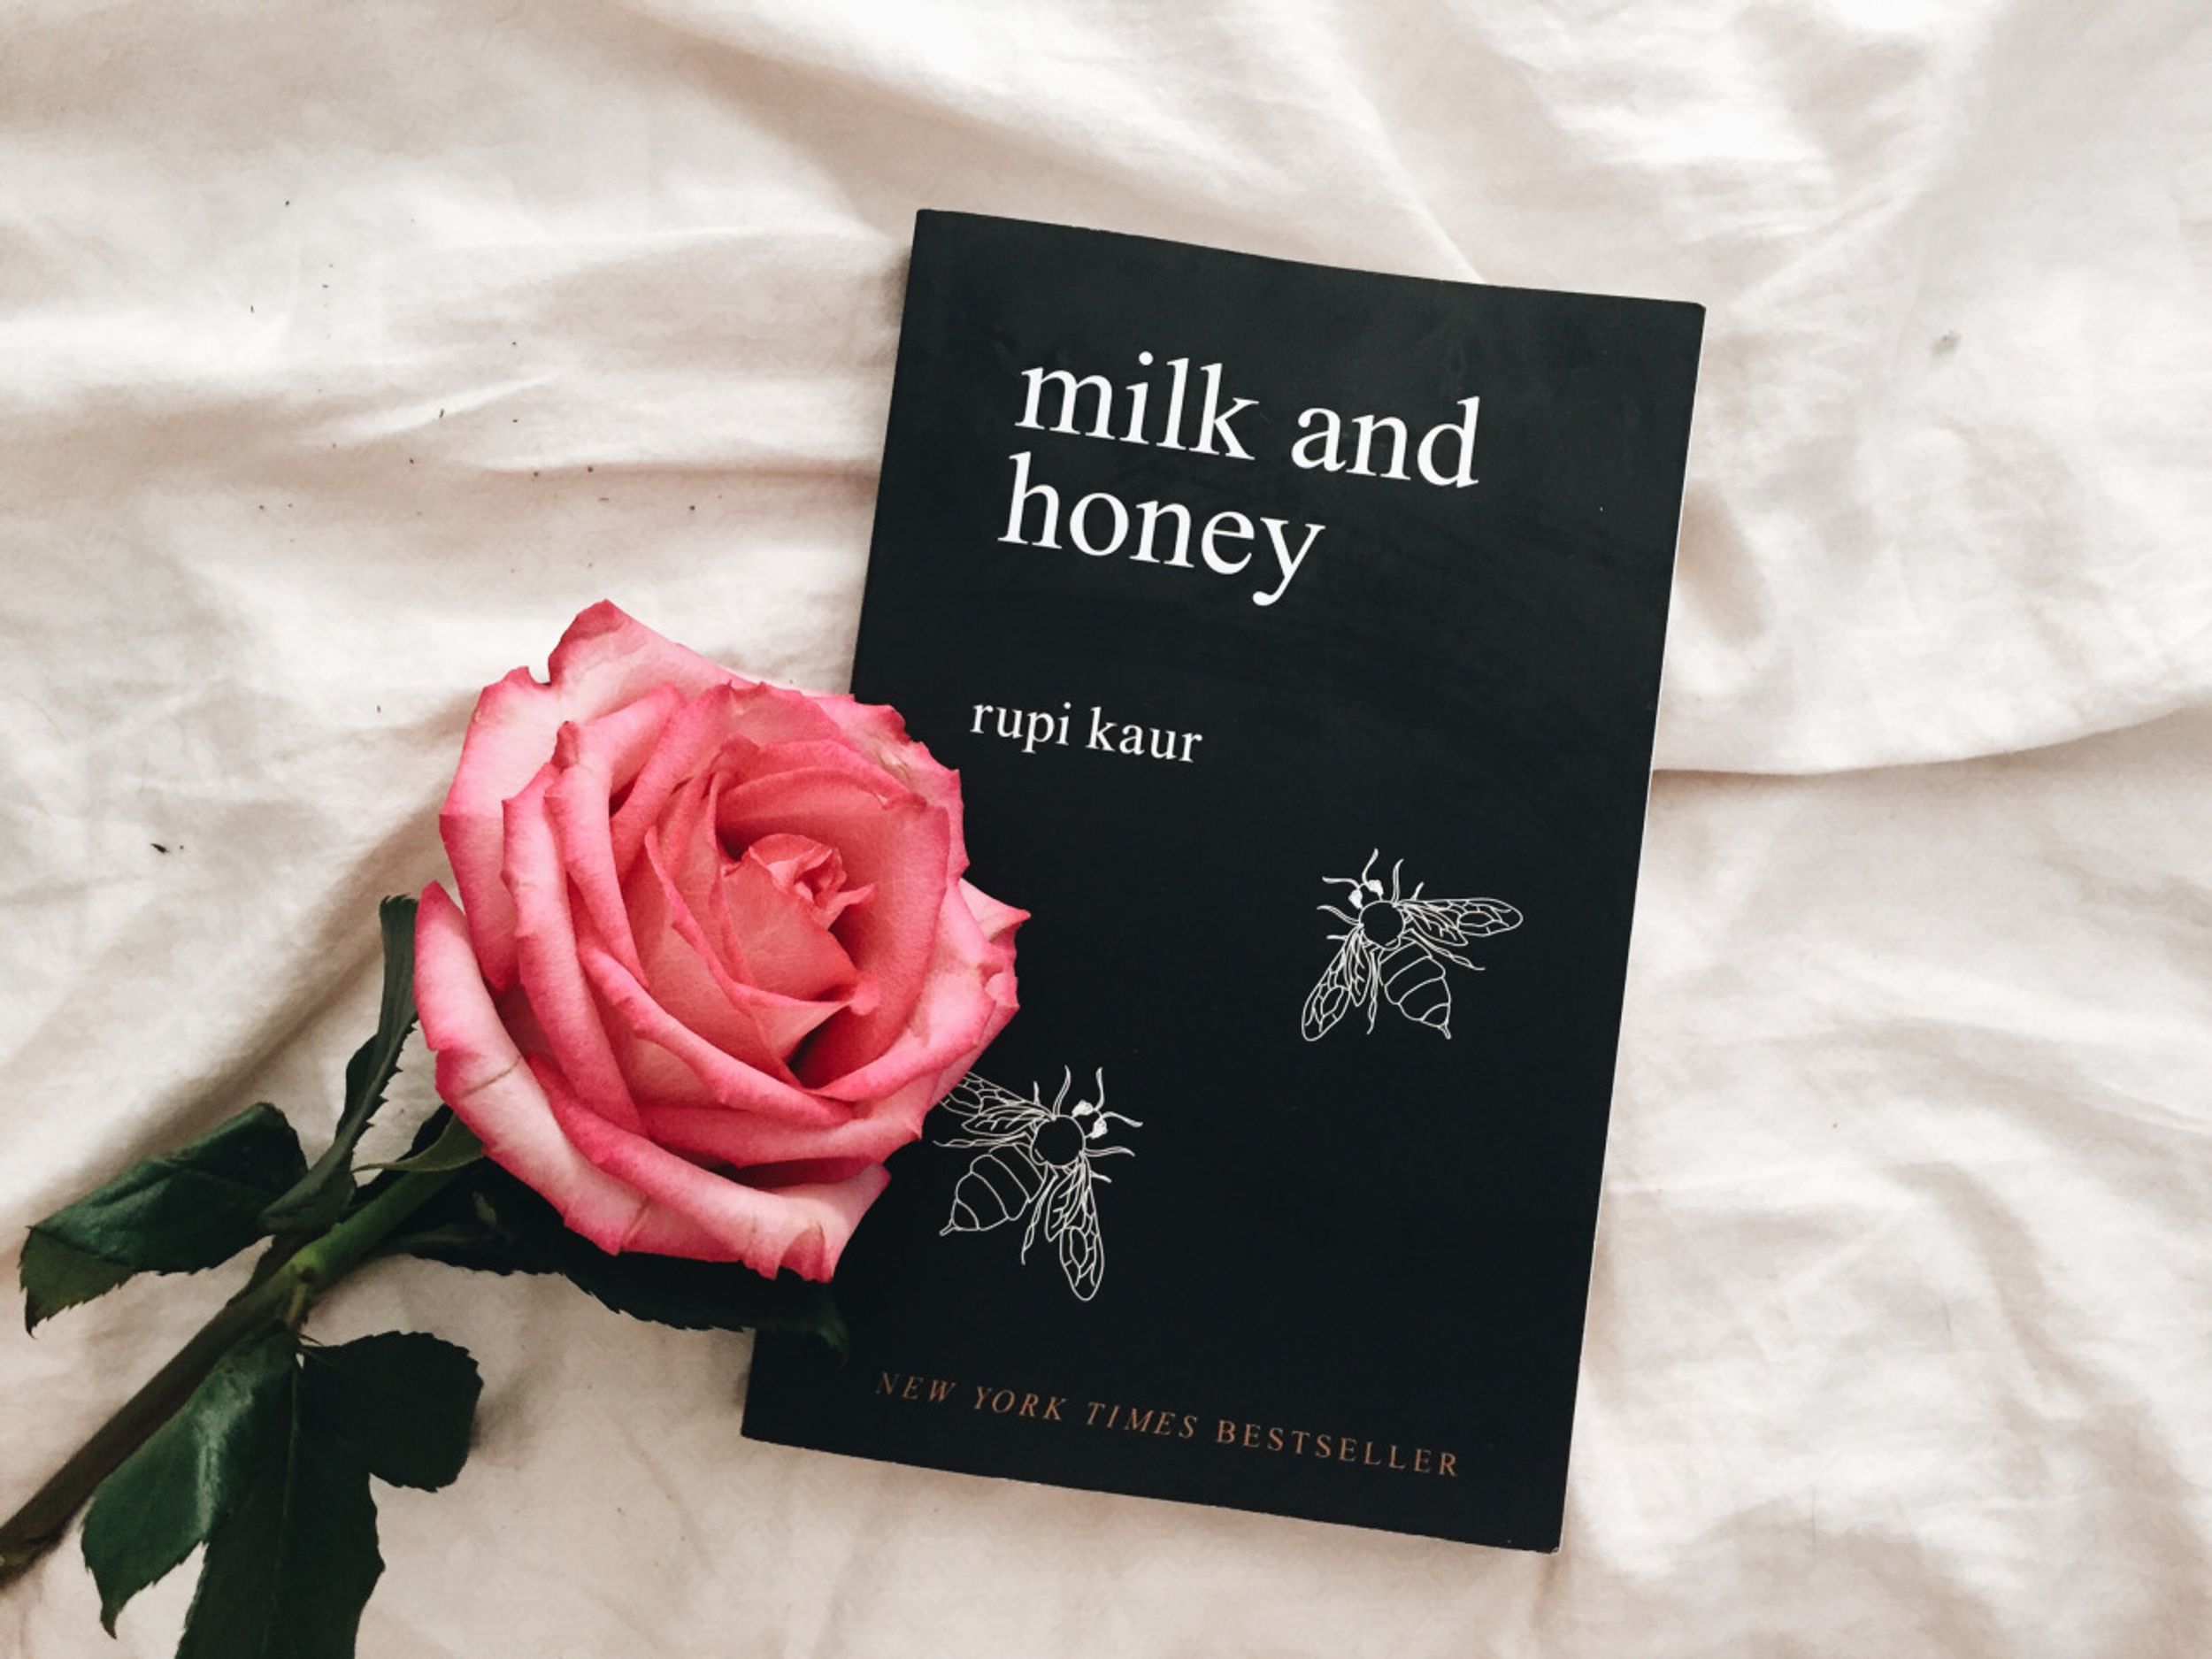 15 Things I Learned After Reading 'Milk And Honey'